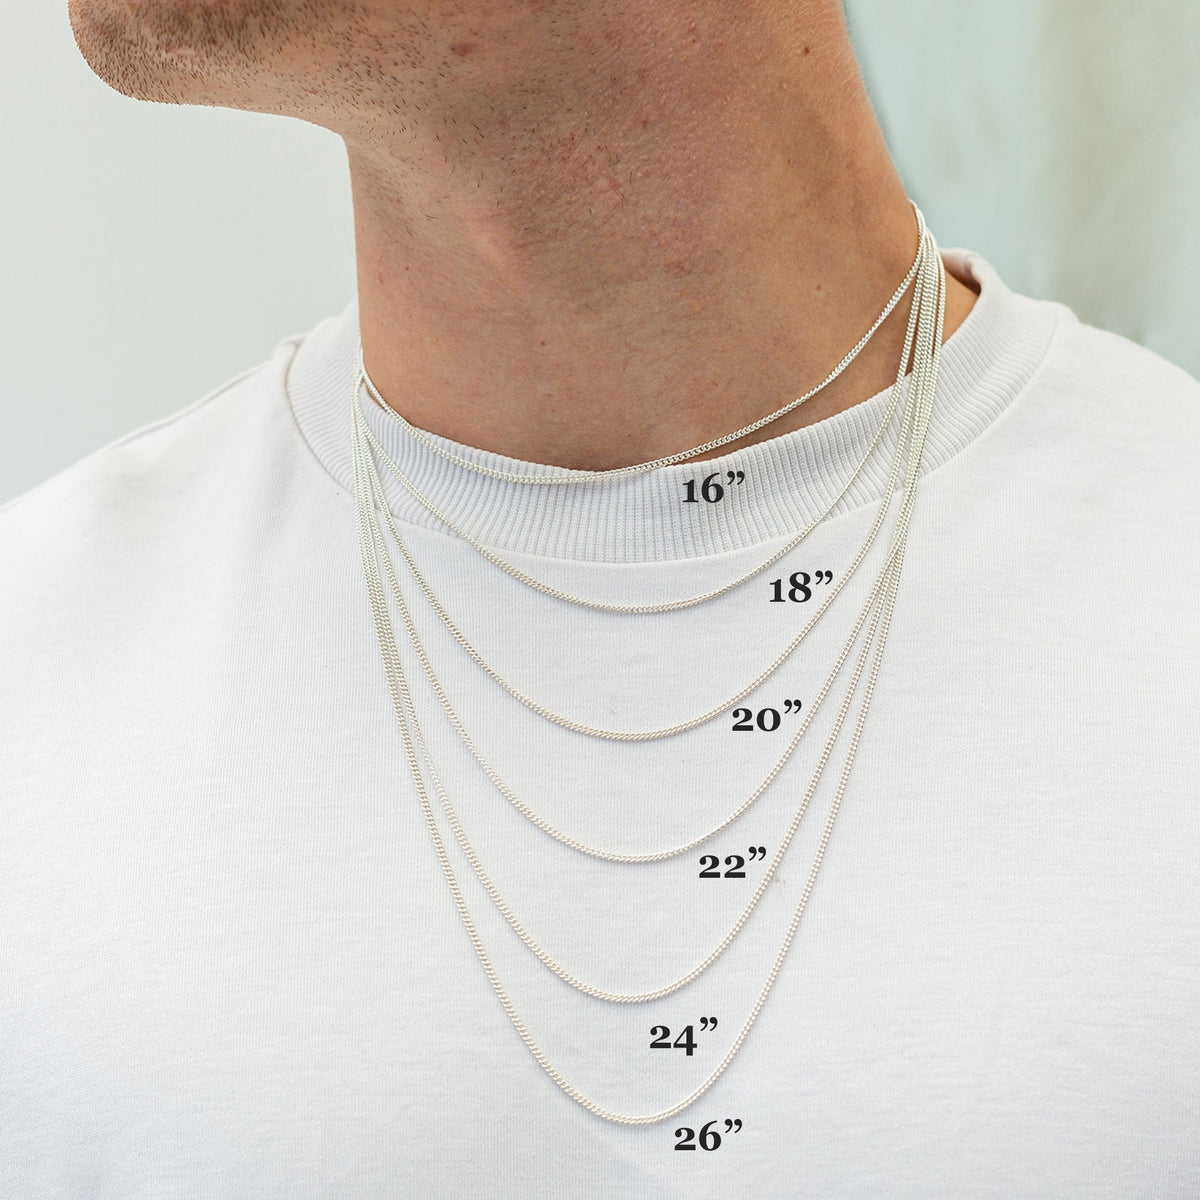 Custom Street Map 25mm Silver Disc Necklace